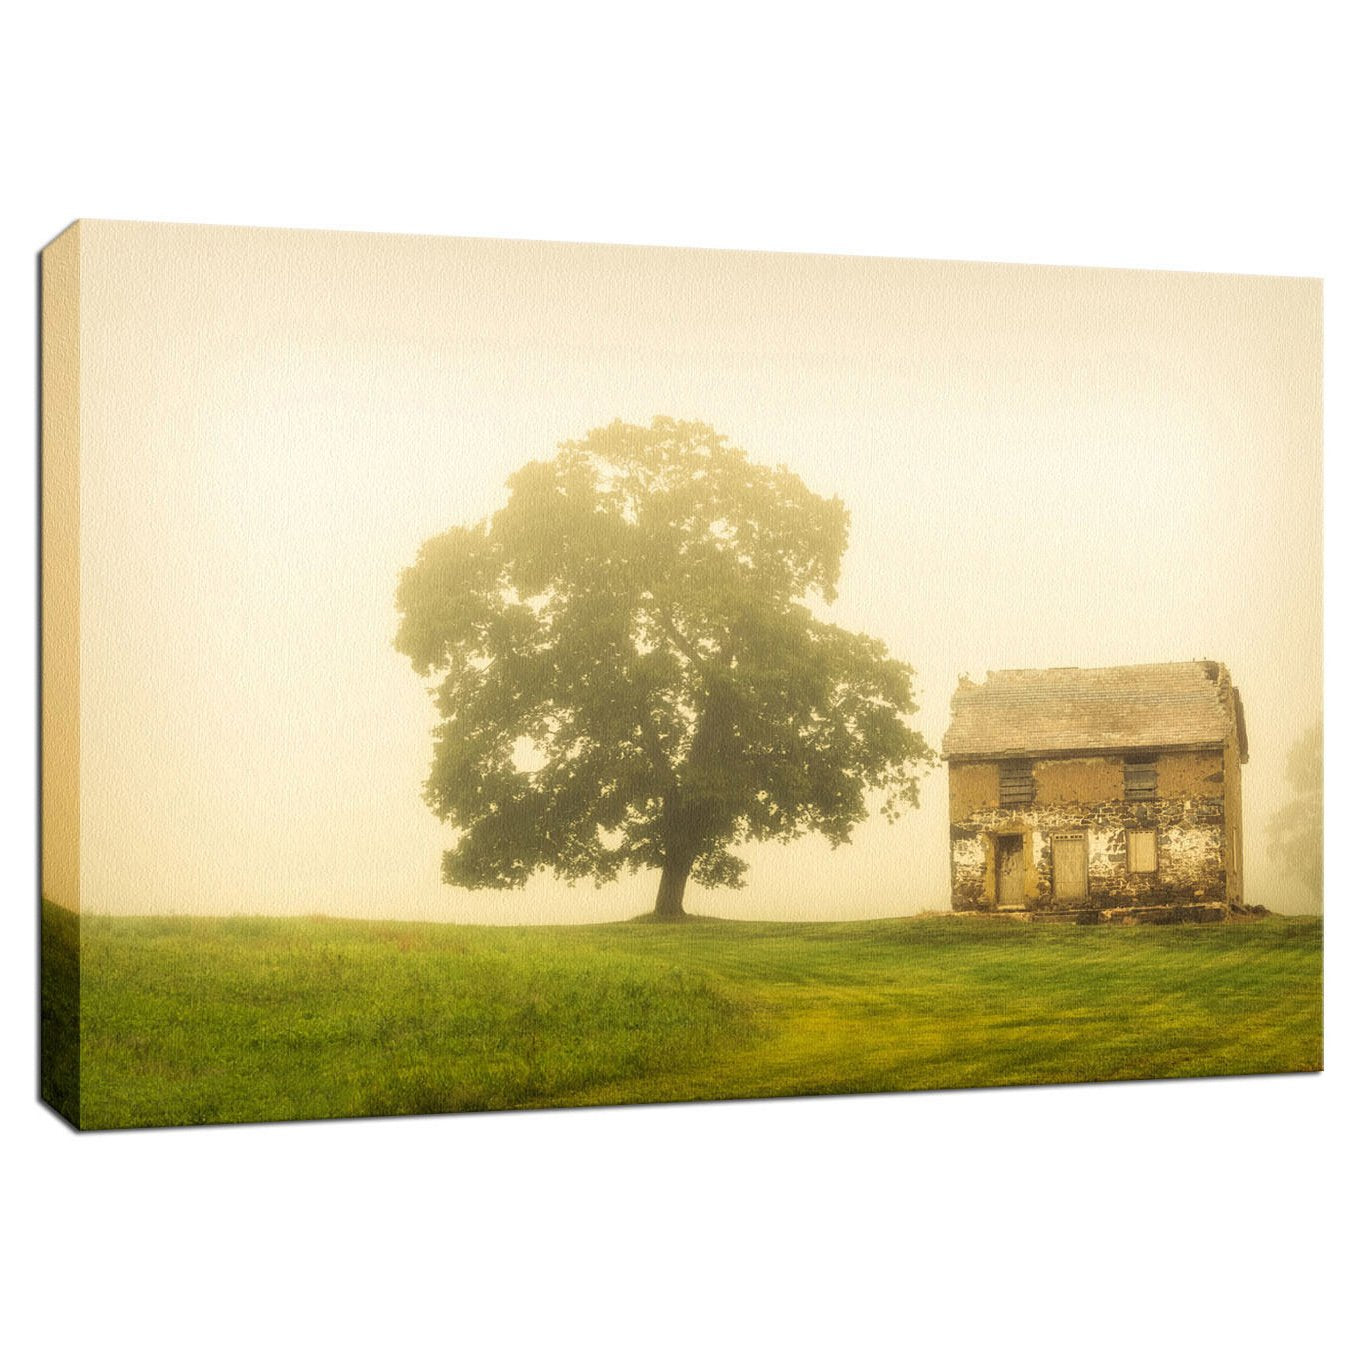 Wall Art Country Scenes: Abandoned House Rural Landscape Photo Fine Art Canvas Wall Art Prints  - PIPAFINEART